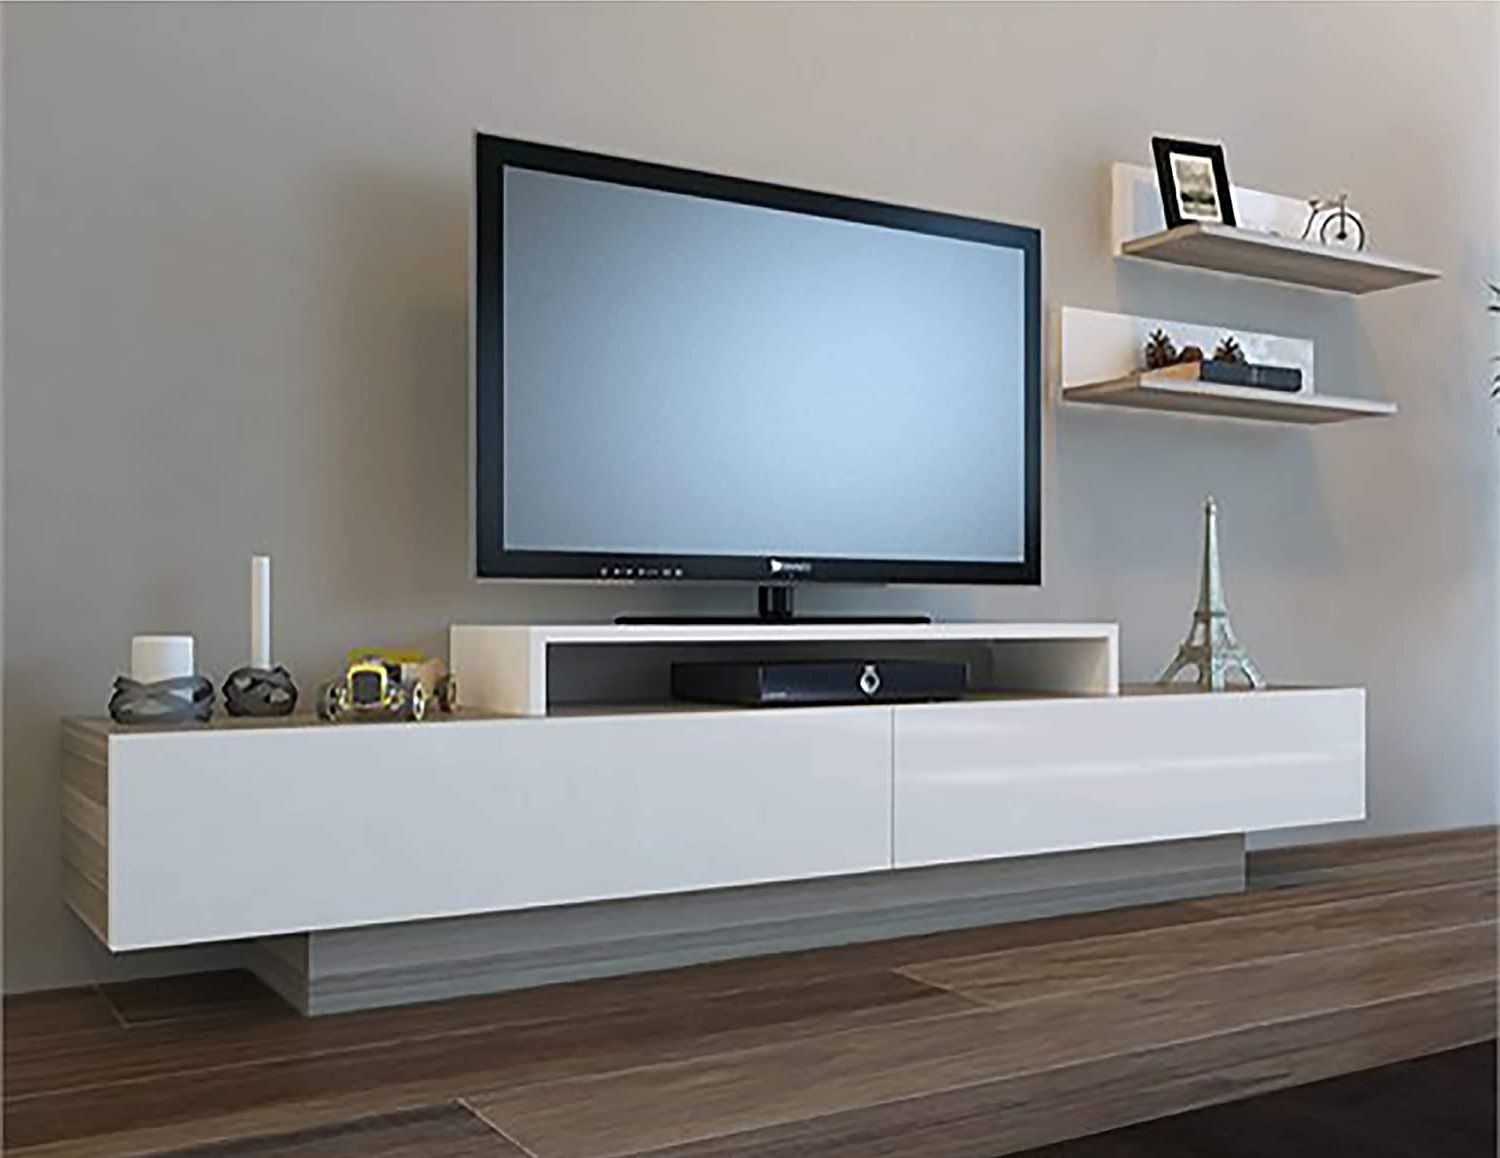 Decorotika Lusi Modern Tv Stand Tv Unit For Tvs Up To 71 Inch With Wall  Shelves (white And Cordoba): Amazon.co (View 4 of 10)